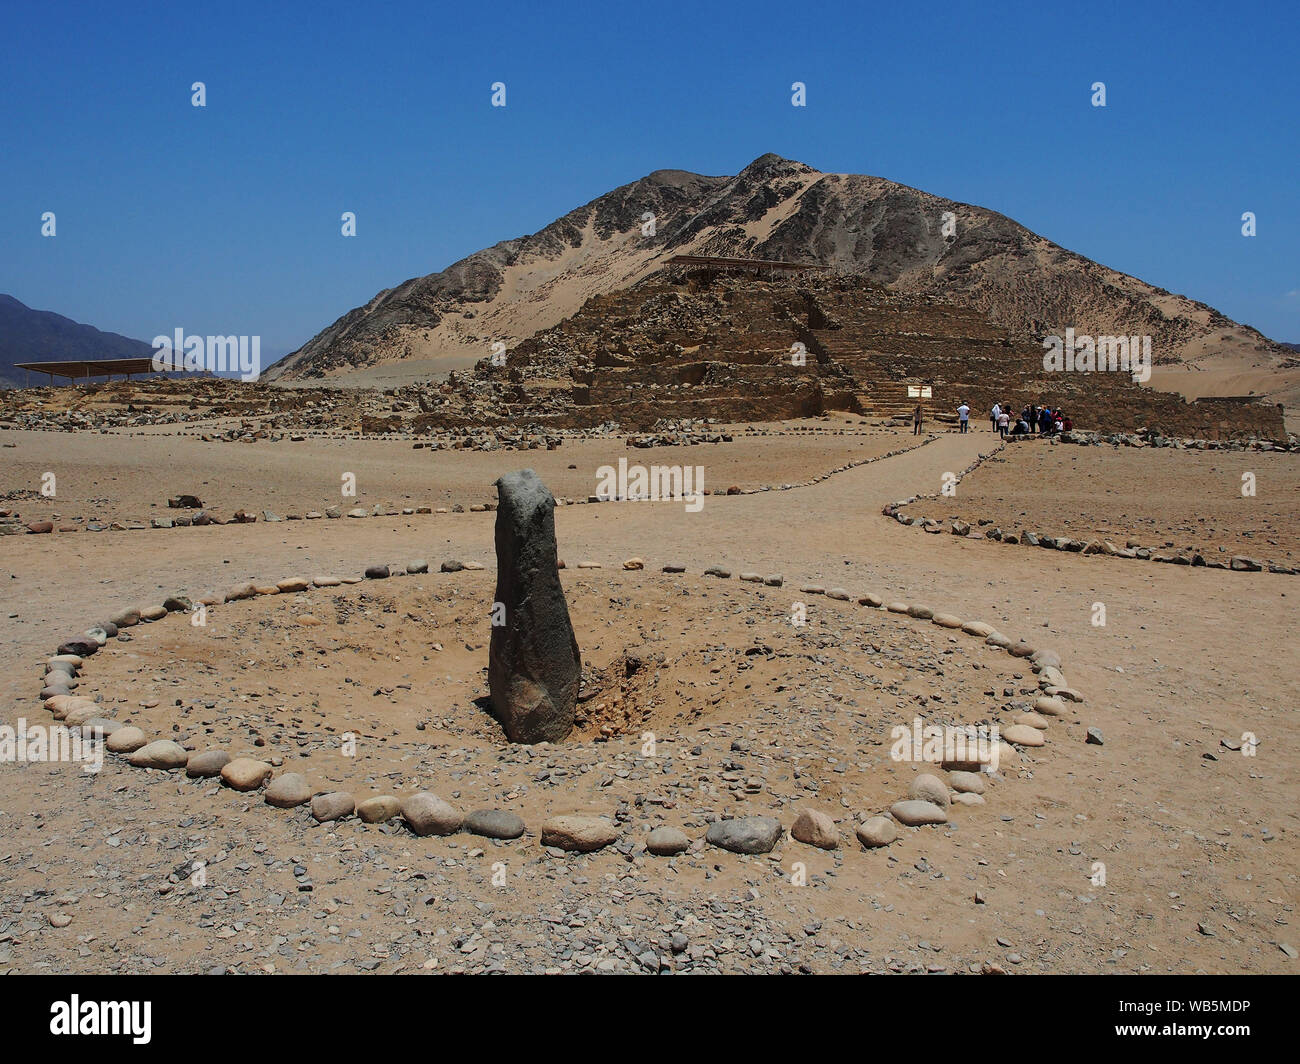 Monolith and pyramid of the ancient sacred city of Caral as part of the celebrations for the 24th anniversary of the beginning of the research work. The sacred city of Caral is considered as the oldest civilization in America, its remains date from 3,500 BC. Stock Photo